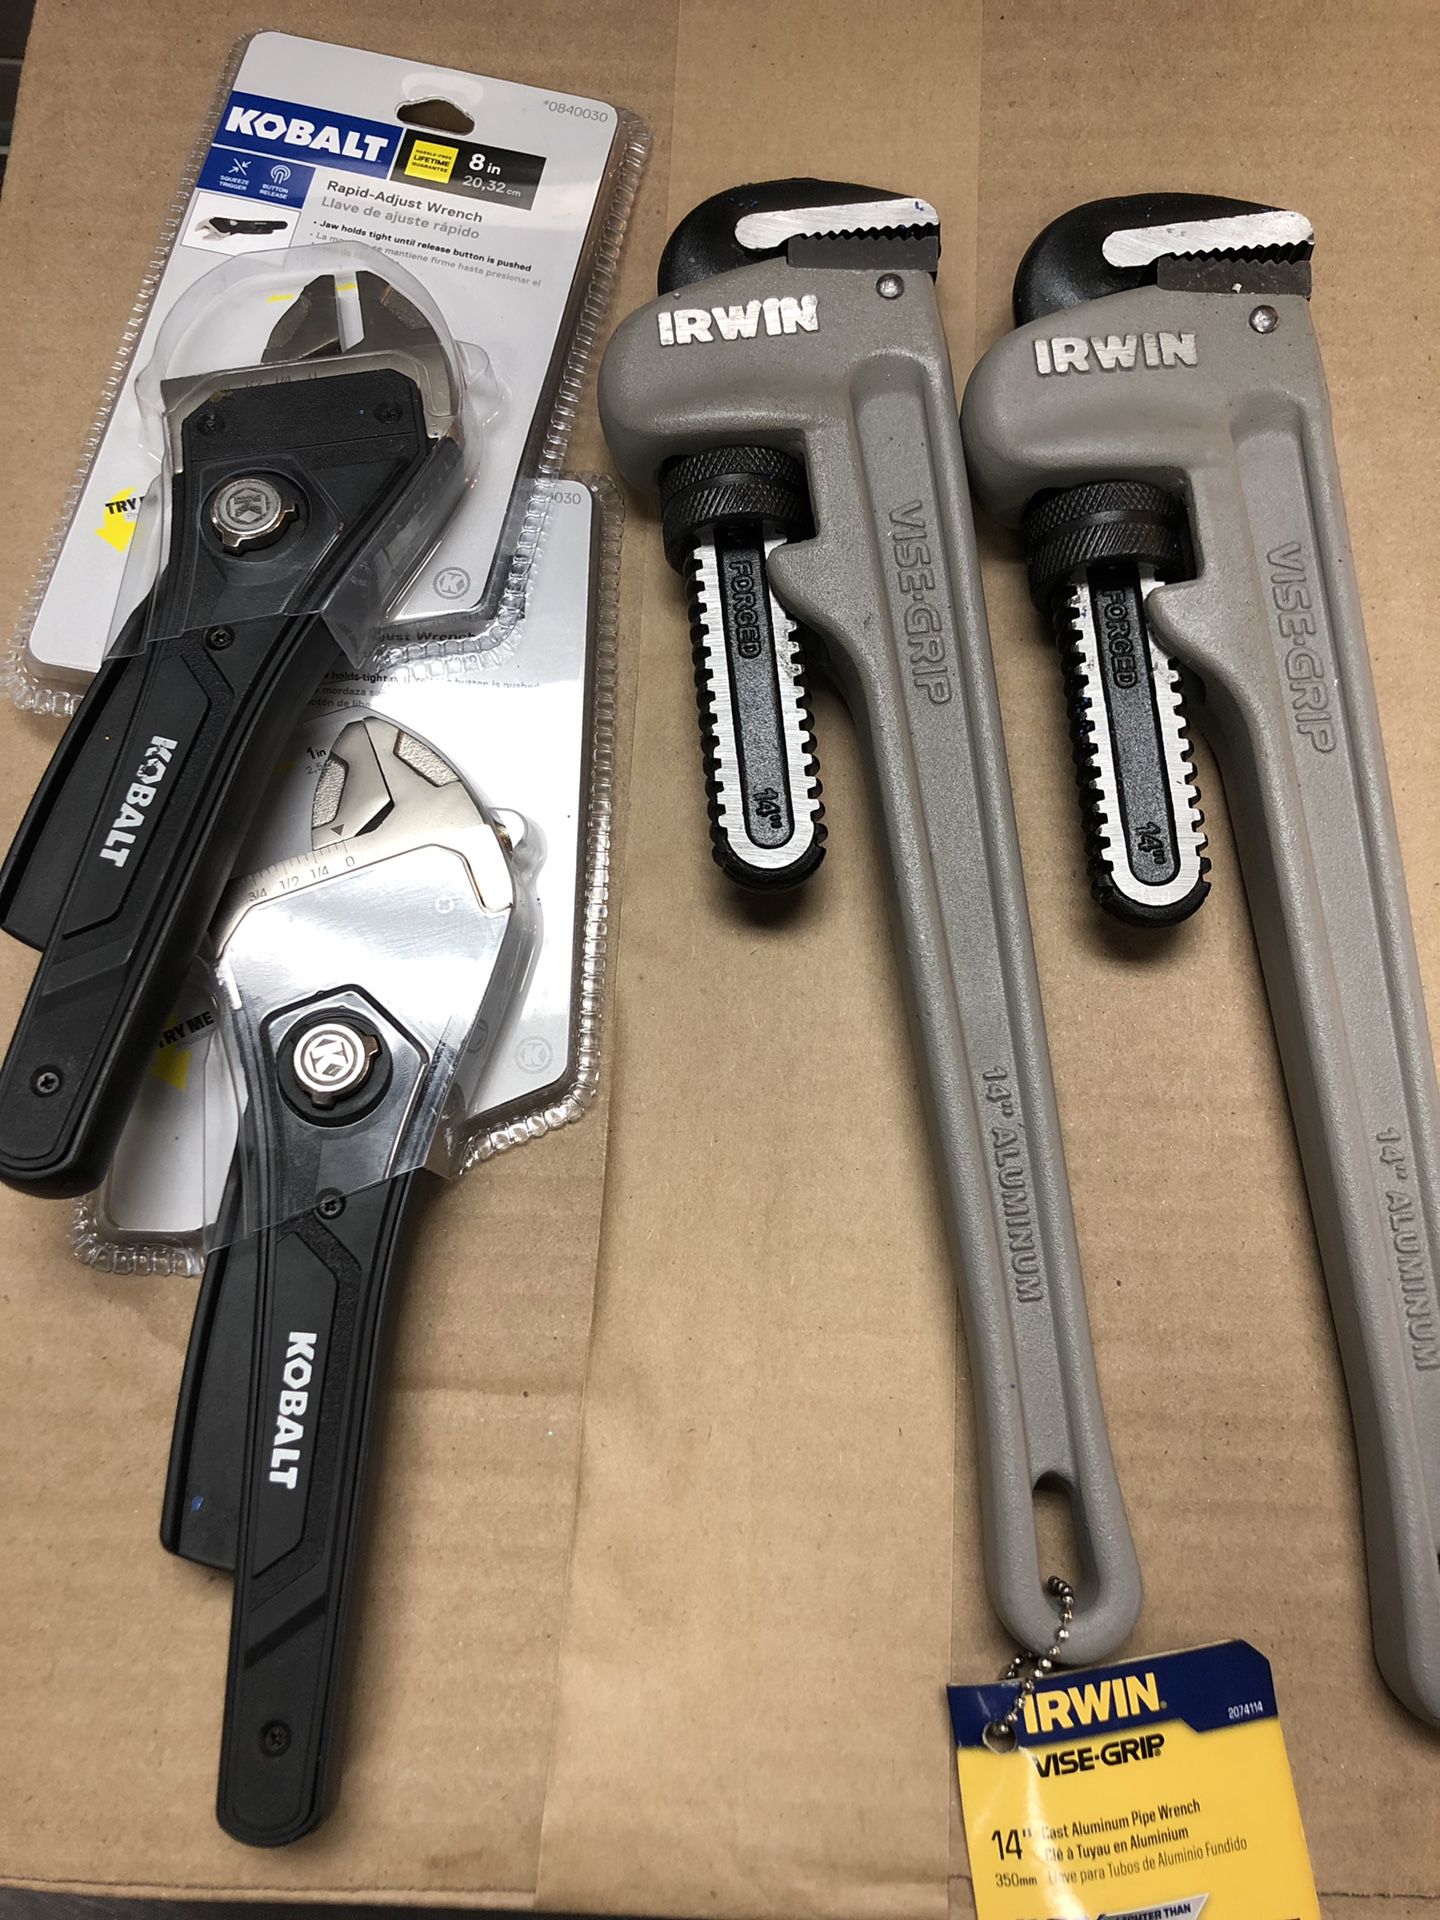 Vice grip and wrench